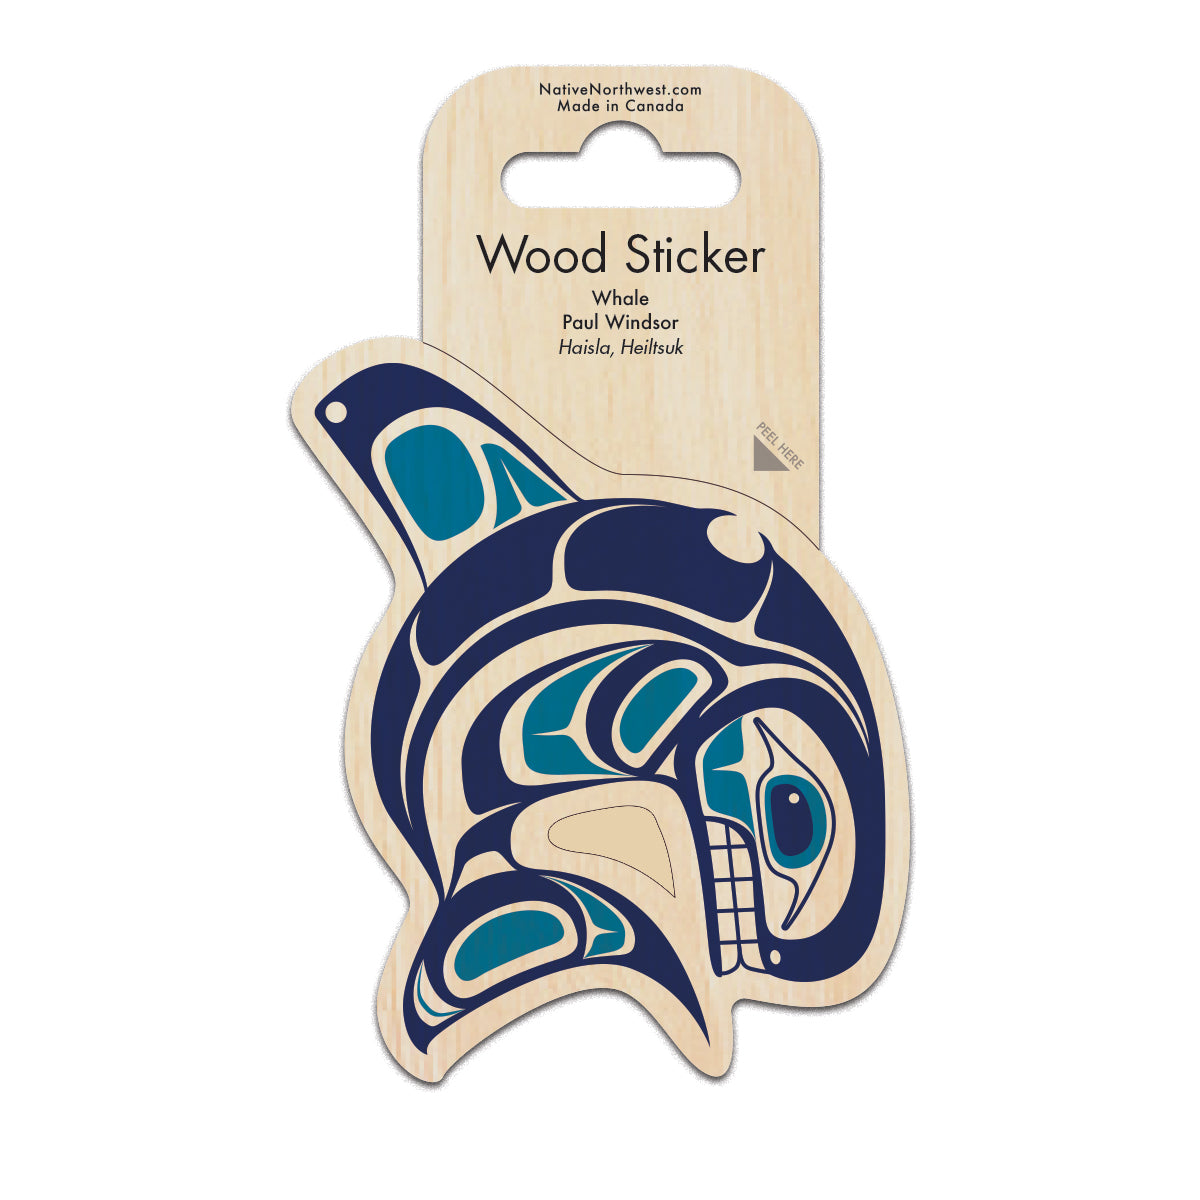 Wood Sticker Whale - Wood Sticker Whale -  - House of Himwitsa Native Art Gallery and Gifts